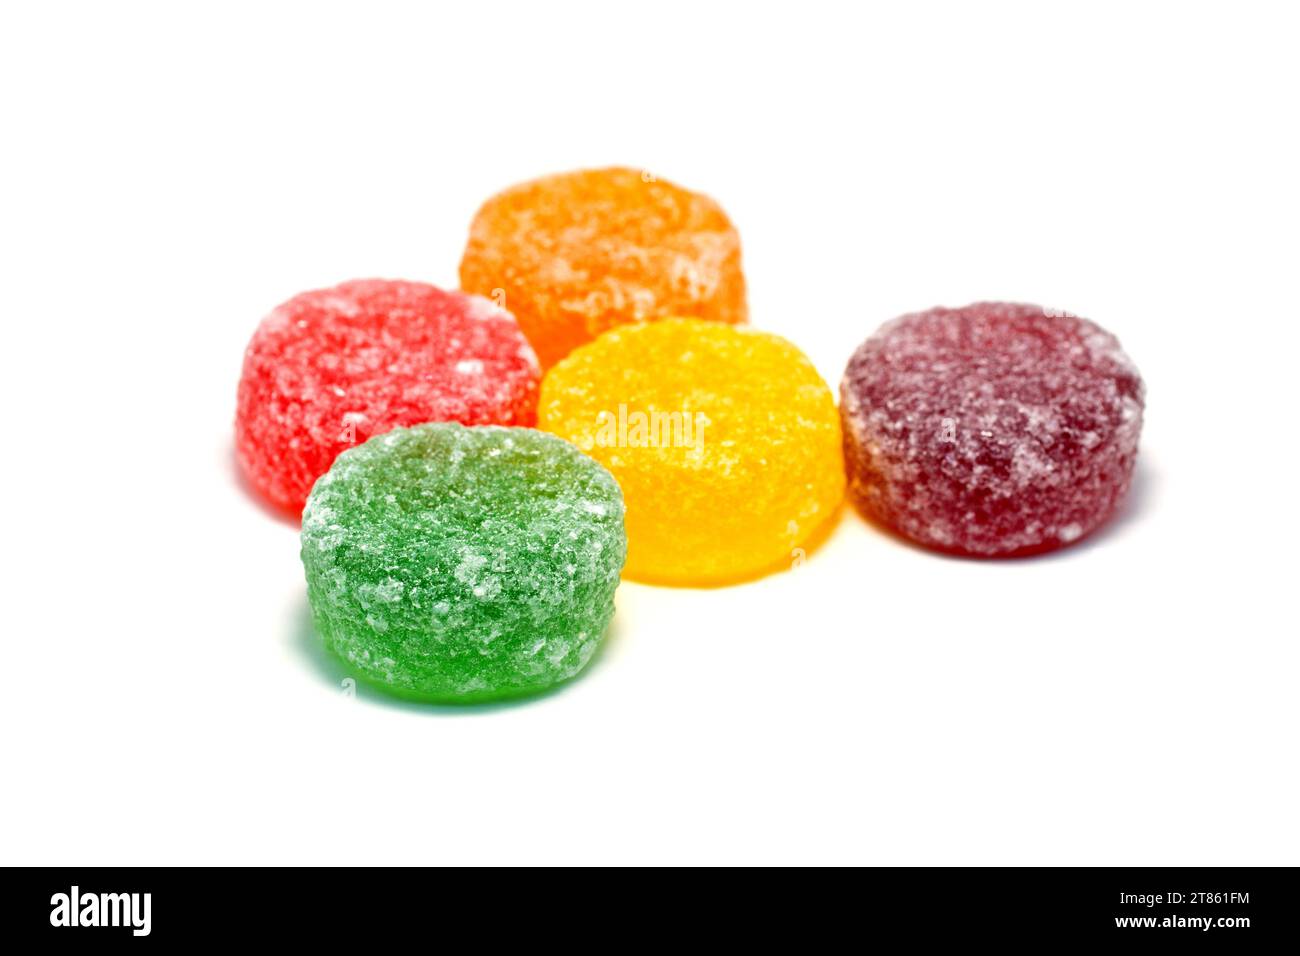 Close up of a selection of colourful fruit pastilles including red, orange, yellow, green and violet, shot against a white background. Stock Photo